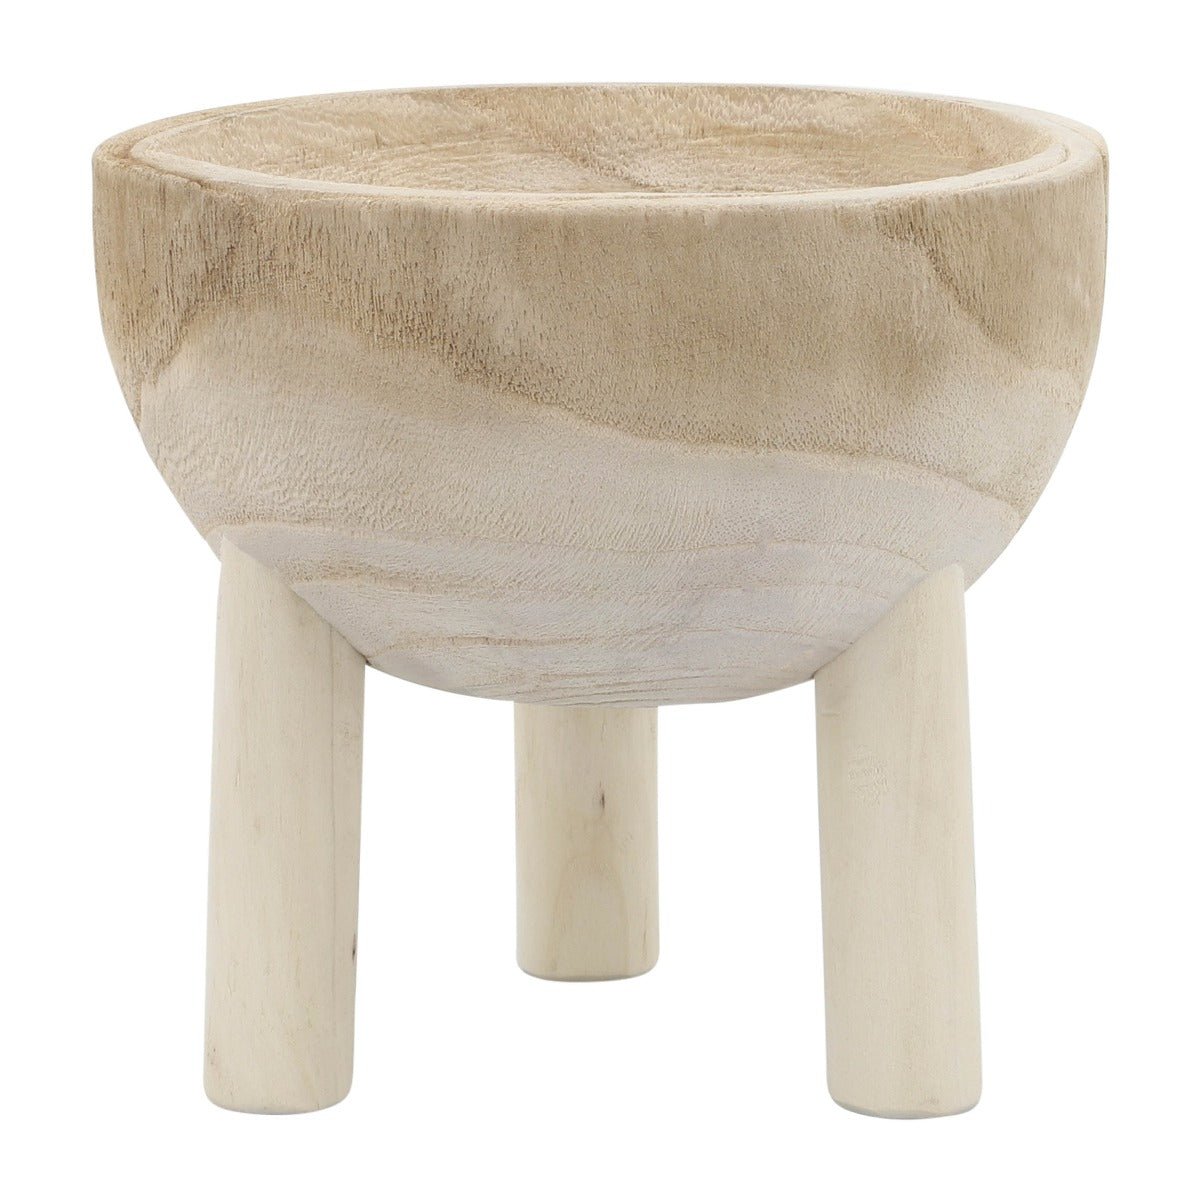 Sagebrook Home Natural Paulownia Wood Bowl with Legs, 8" - lily & onyx